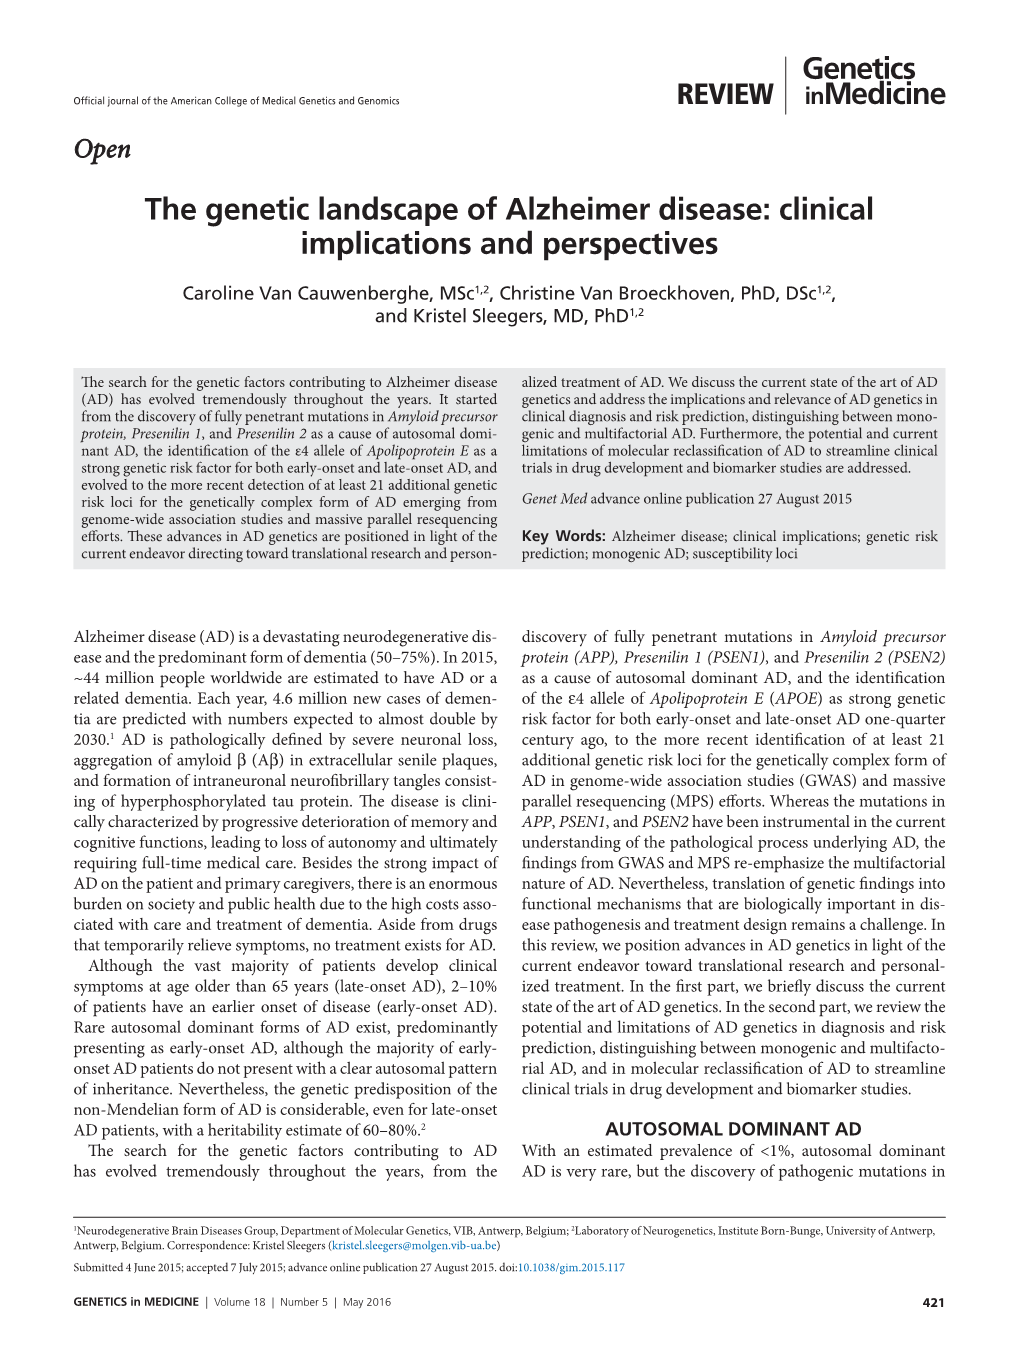 The Genetic Landscape of Alzheimer Disease: Clinical Implications and Perspectives